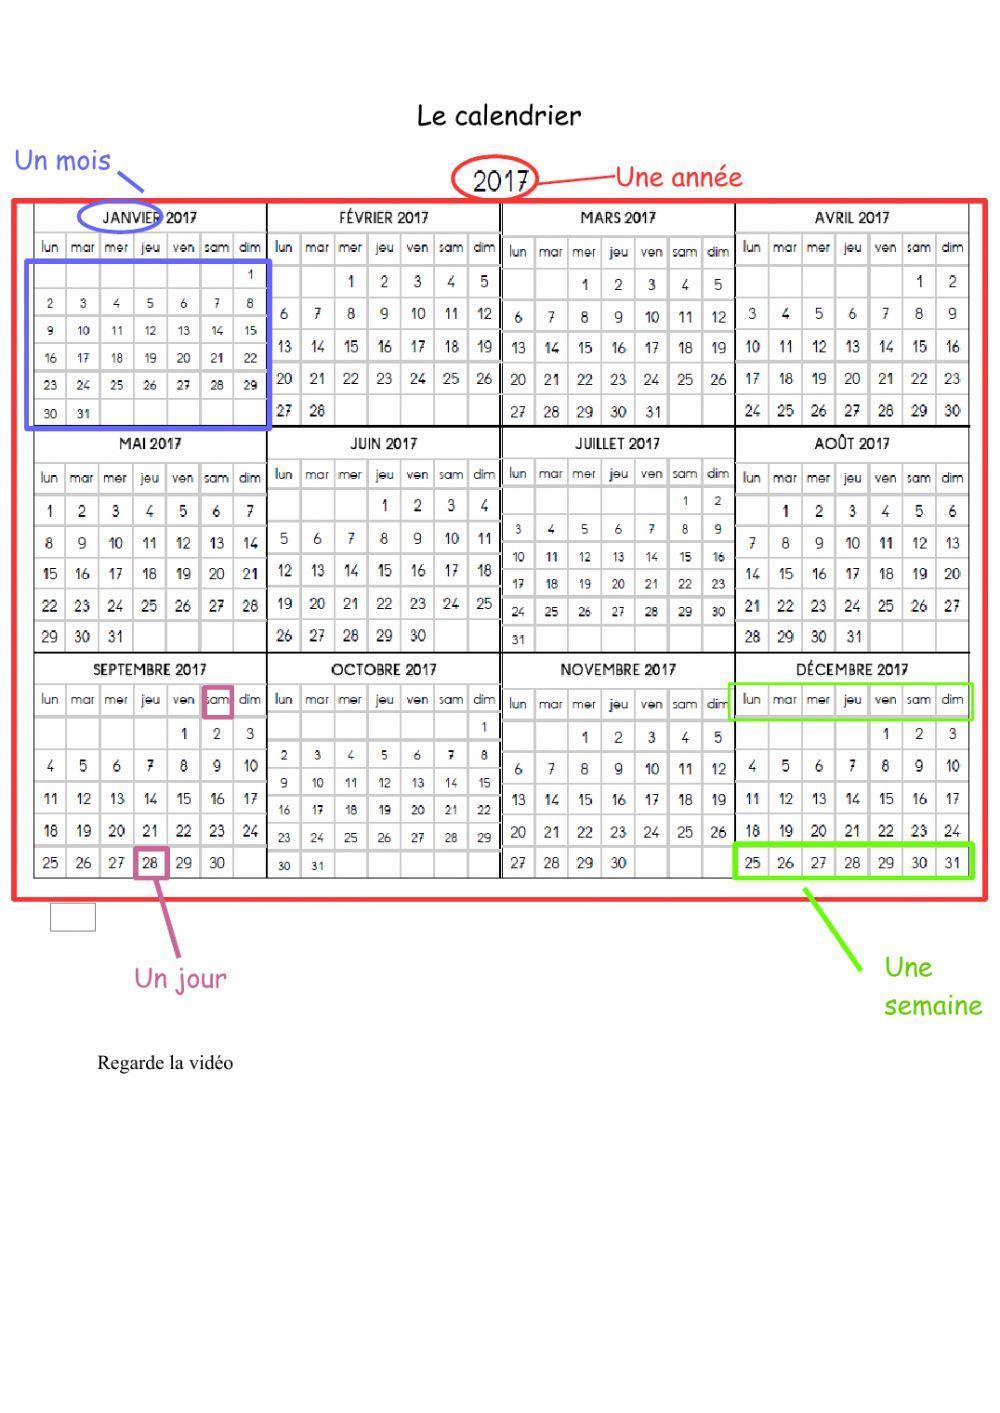 Le calendrier interactive worksheet